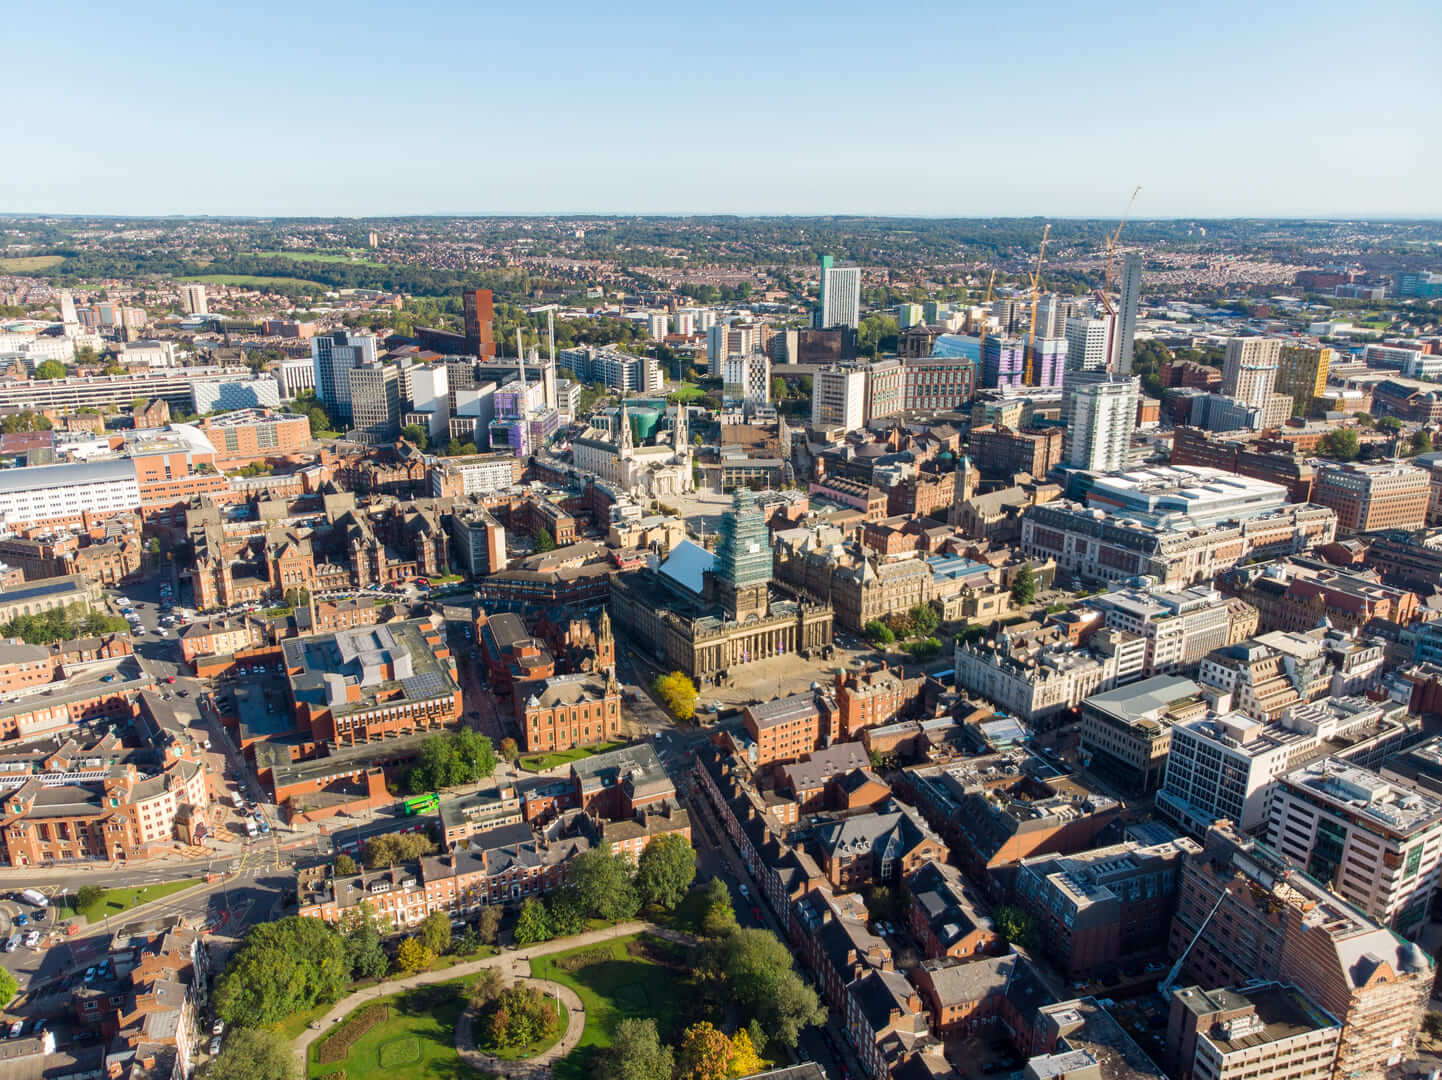 Aerial photo of the Leeds City Centre in West Yorkshire UK, showing business & hotels in the city centre, on a bright sunny day
